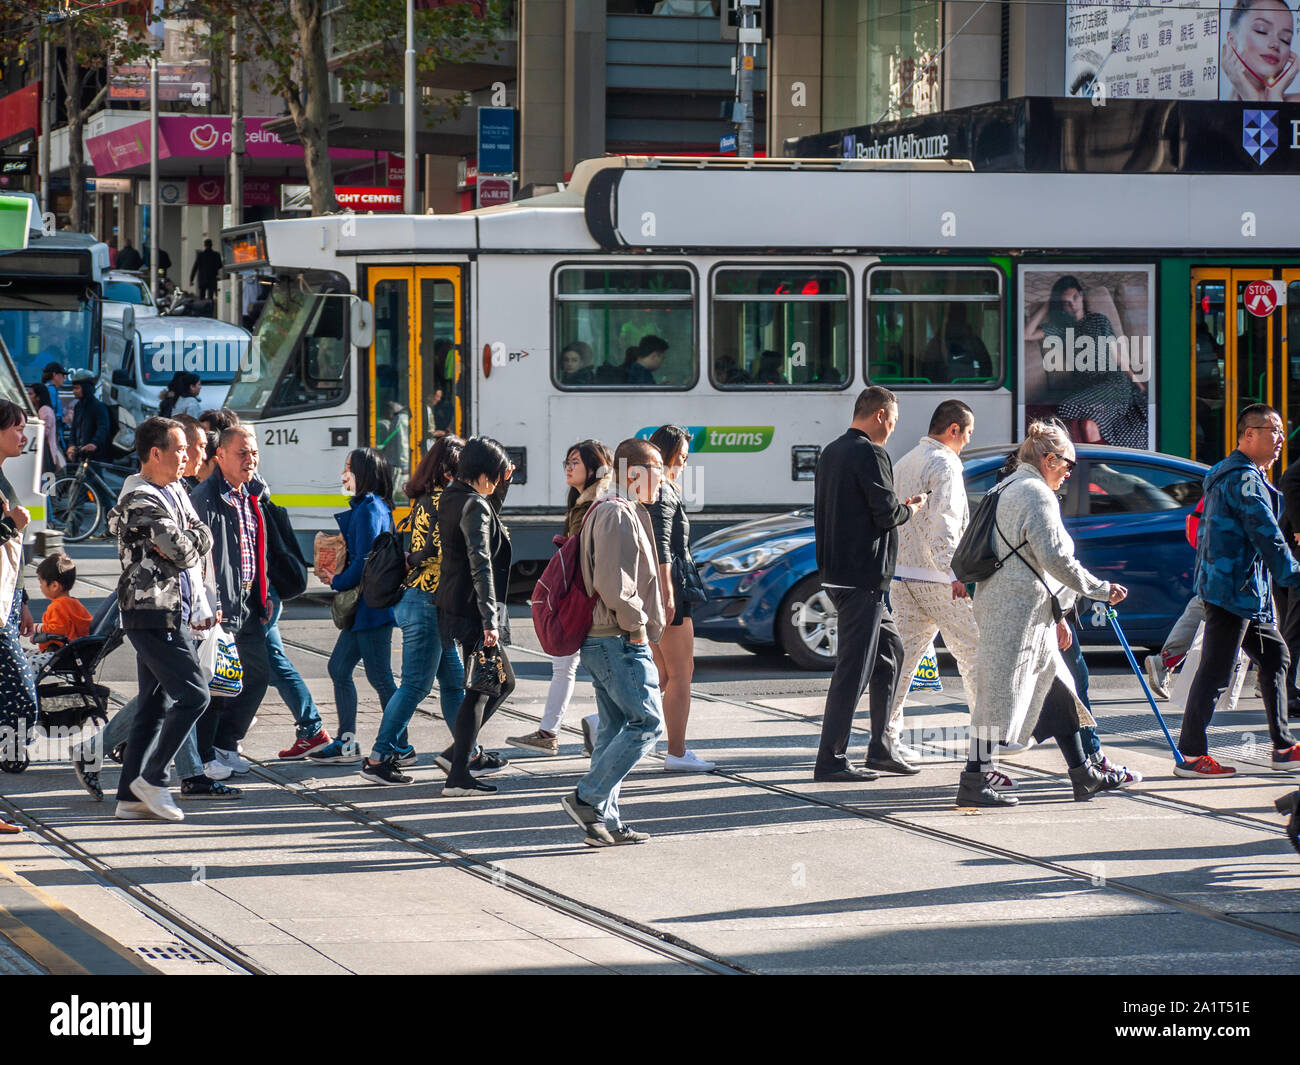 Crowds of pedestrians walking across the street in CBD.  City of Melbourne, VIC Australia. Stock Photo